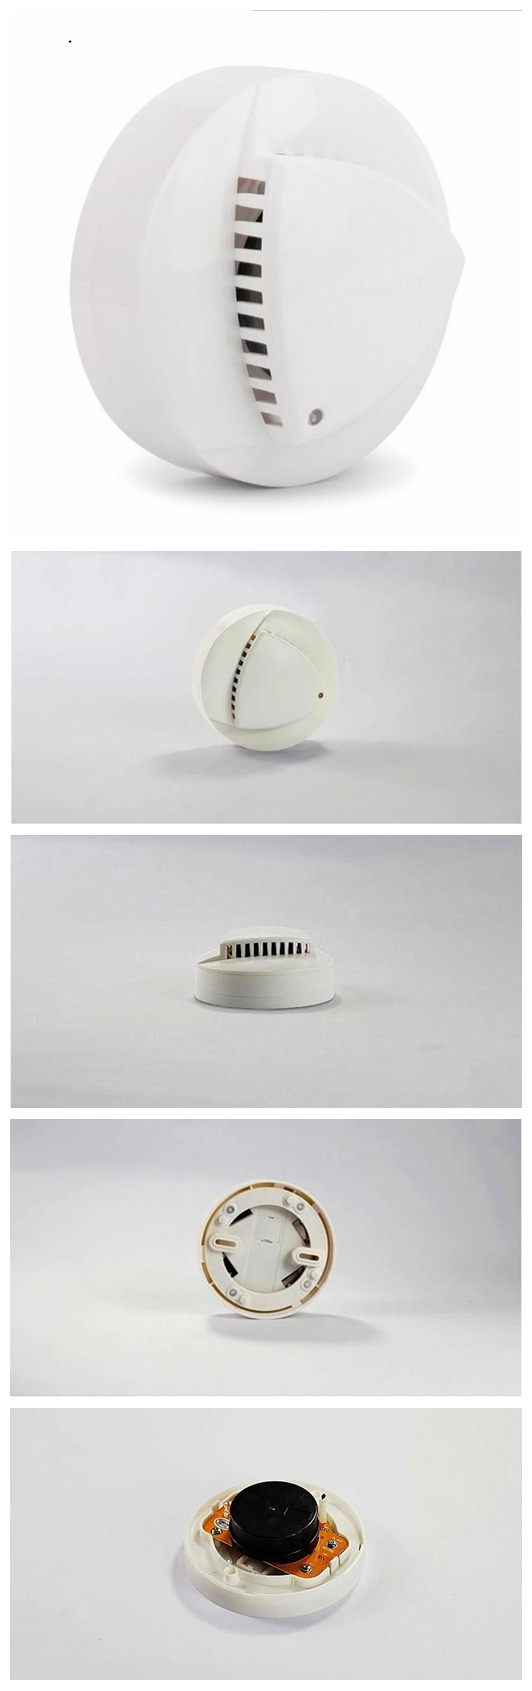 Network Optical Fire Detector Fire Smoke Alarm for Home Security